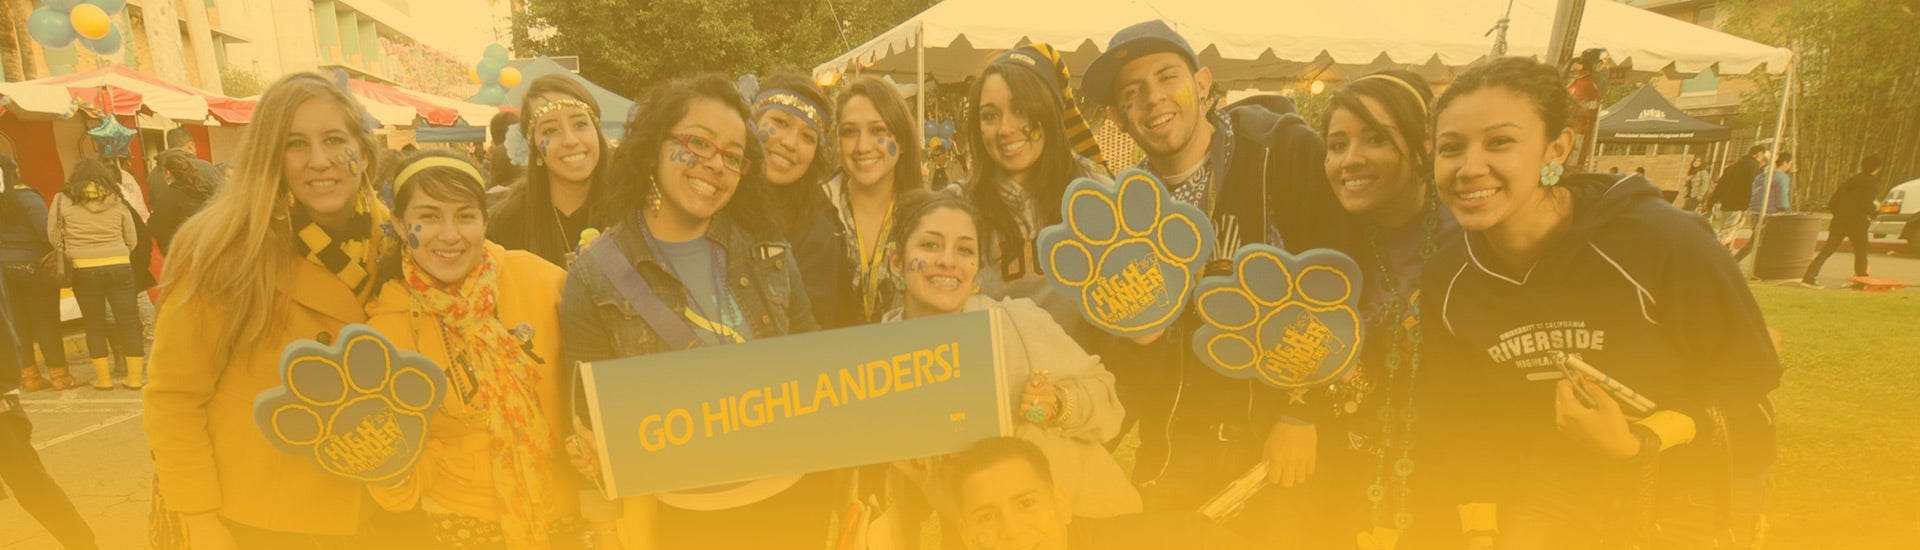 UCR students pose for a group picture during a campus event.